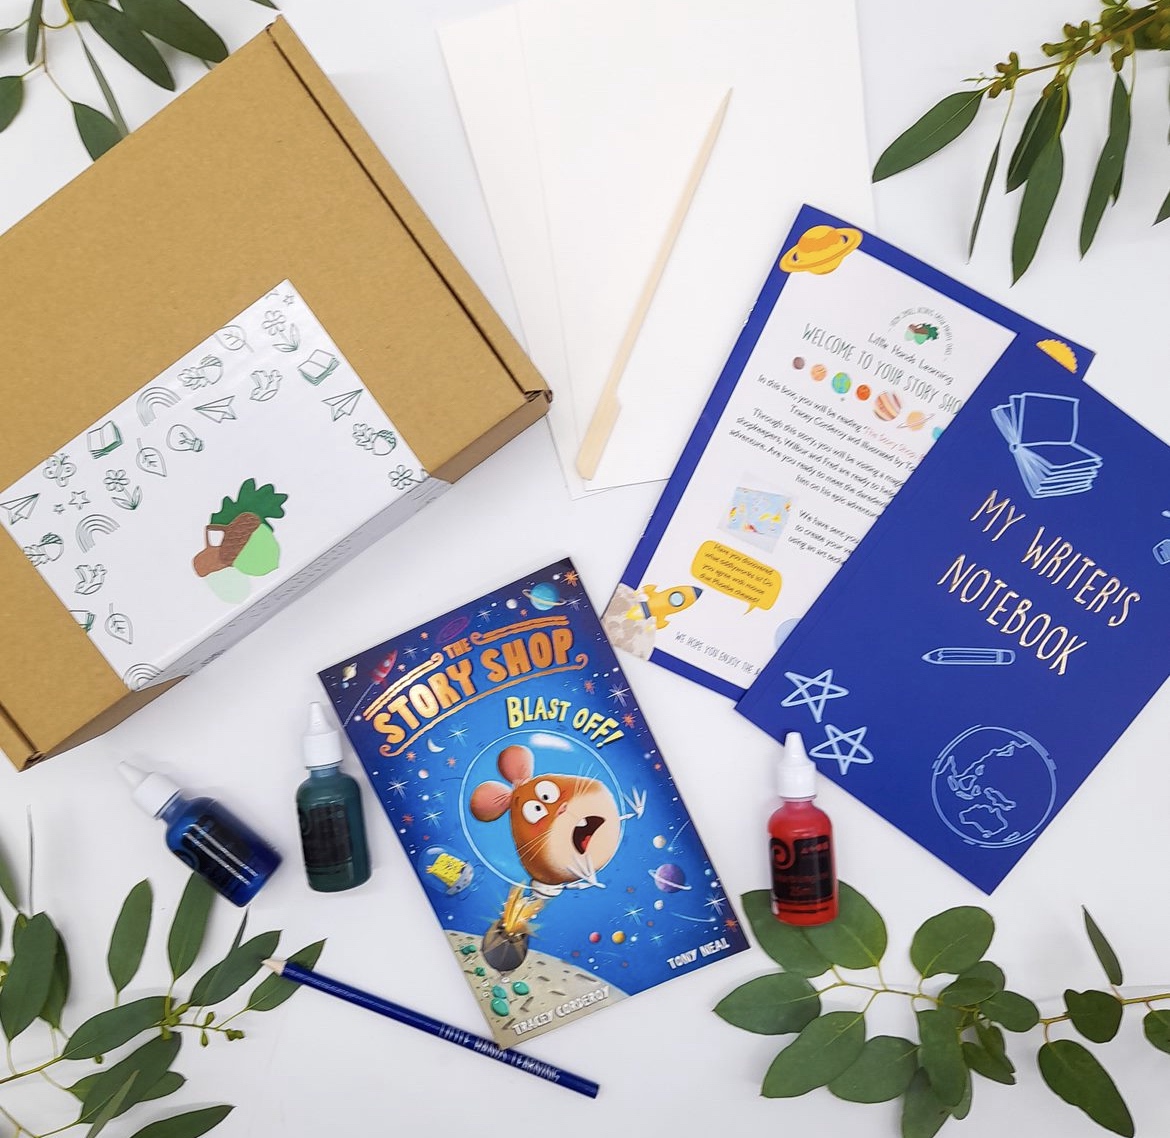 Little Hands Learning launches new educational subscription box for children aged 6 and over